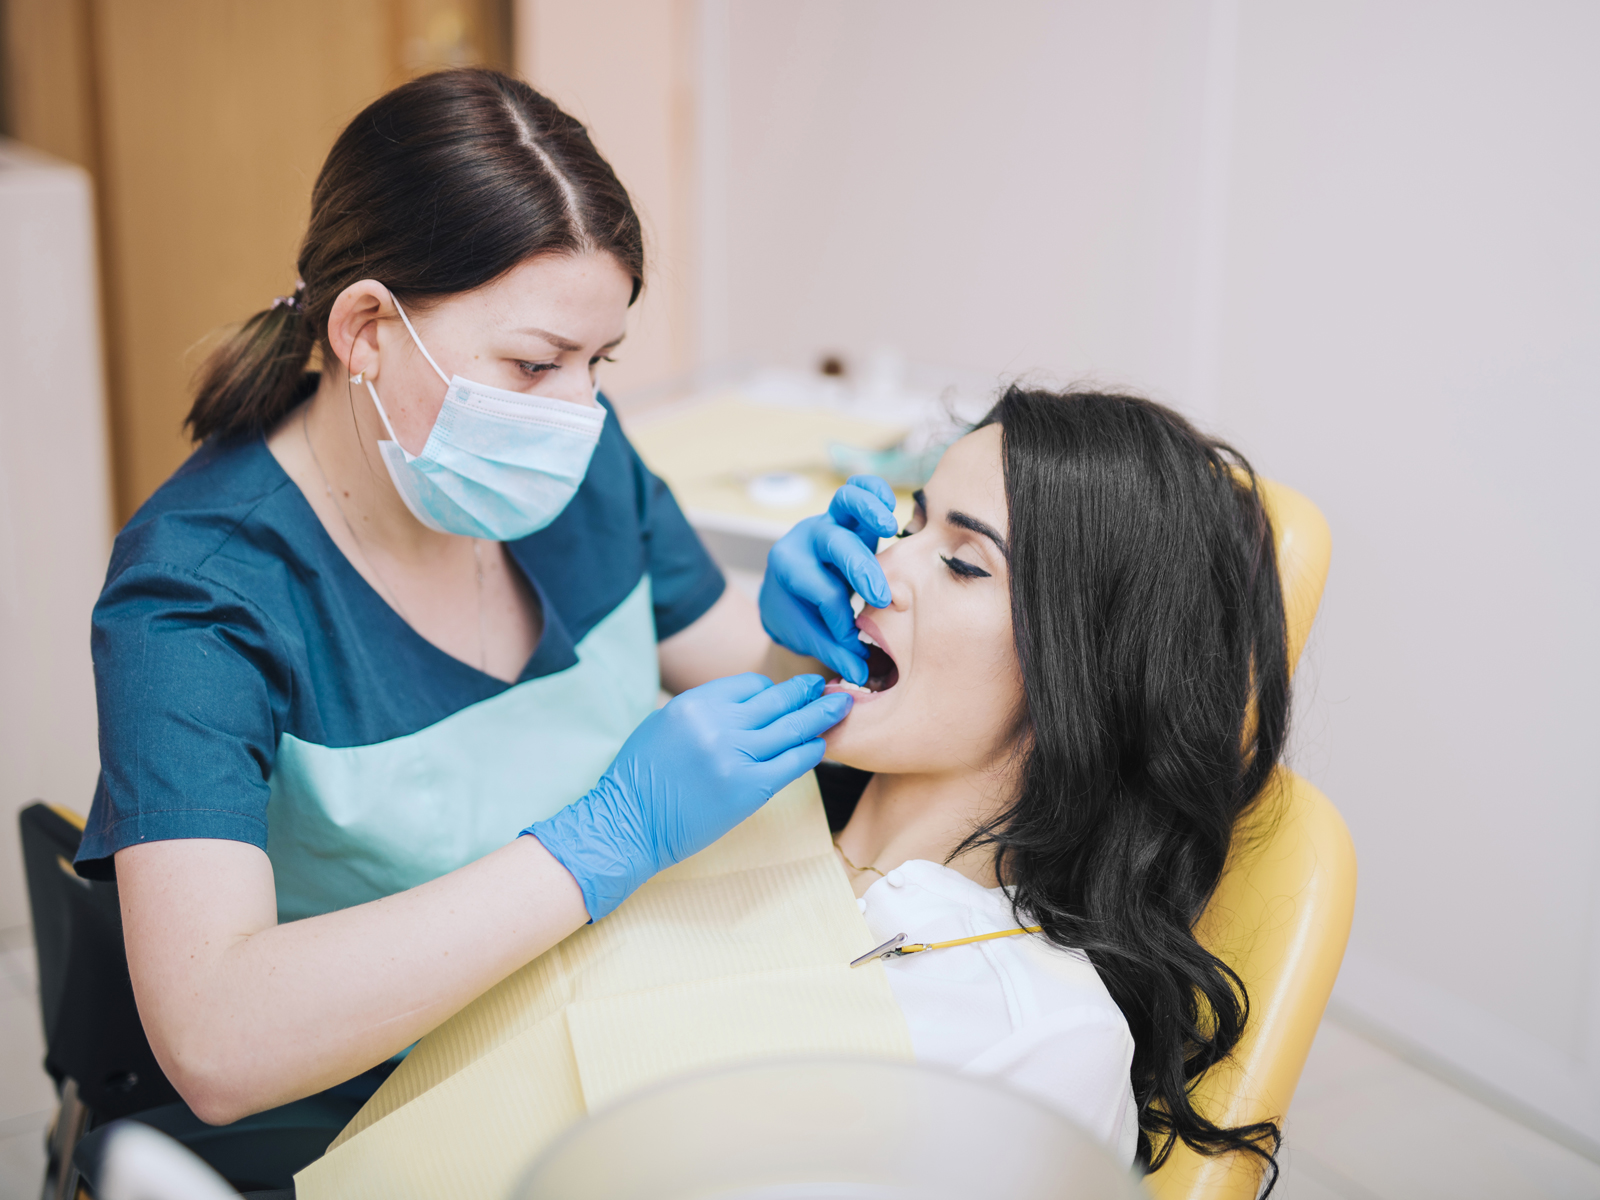 How do you choose the appropriate dentist for your oral health?